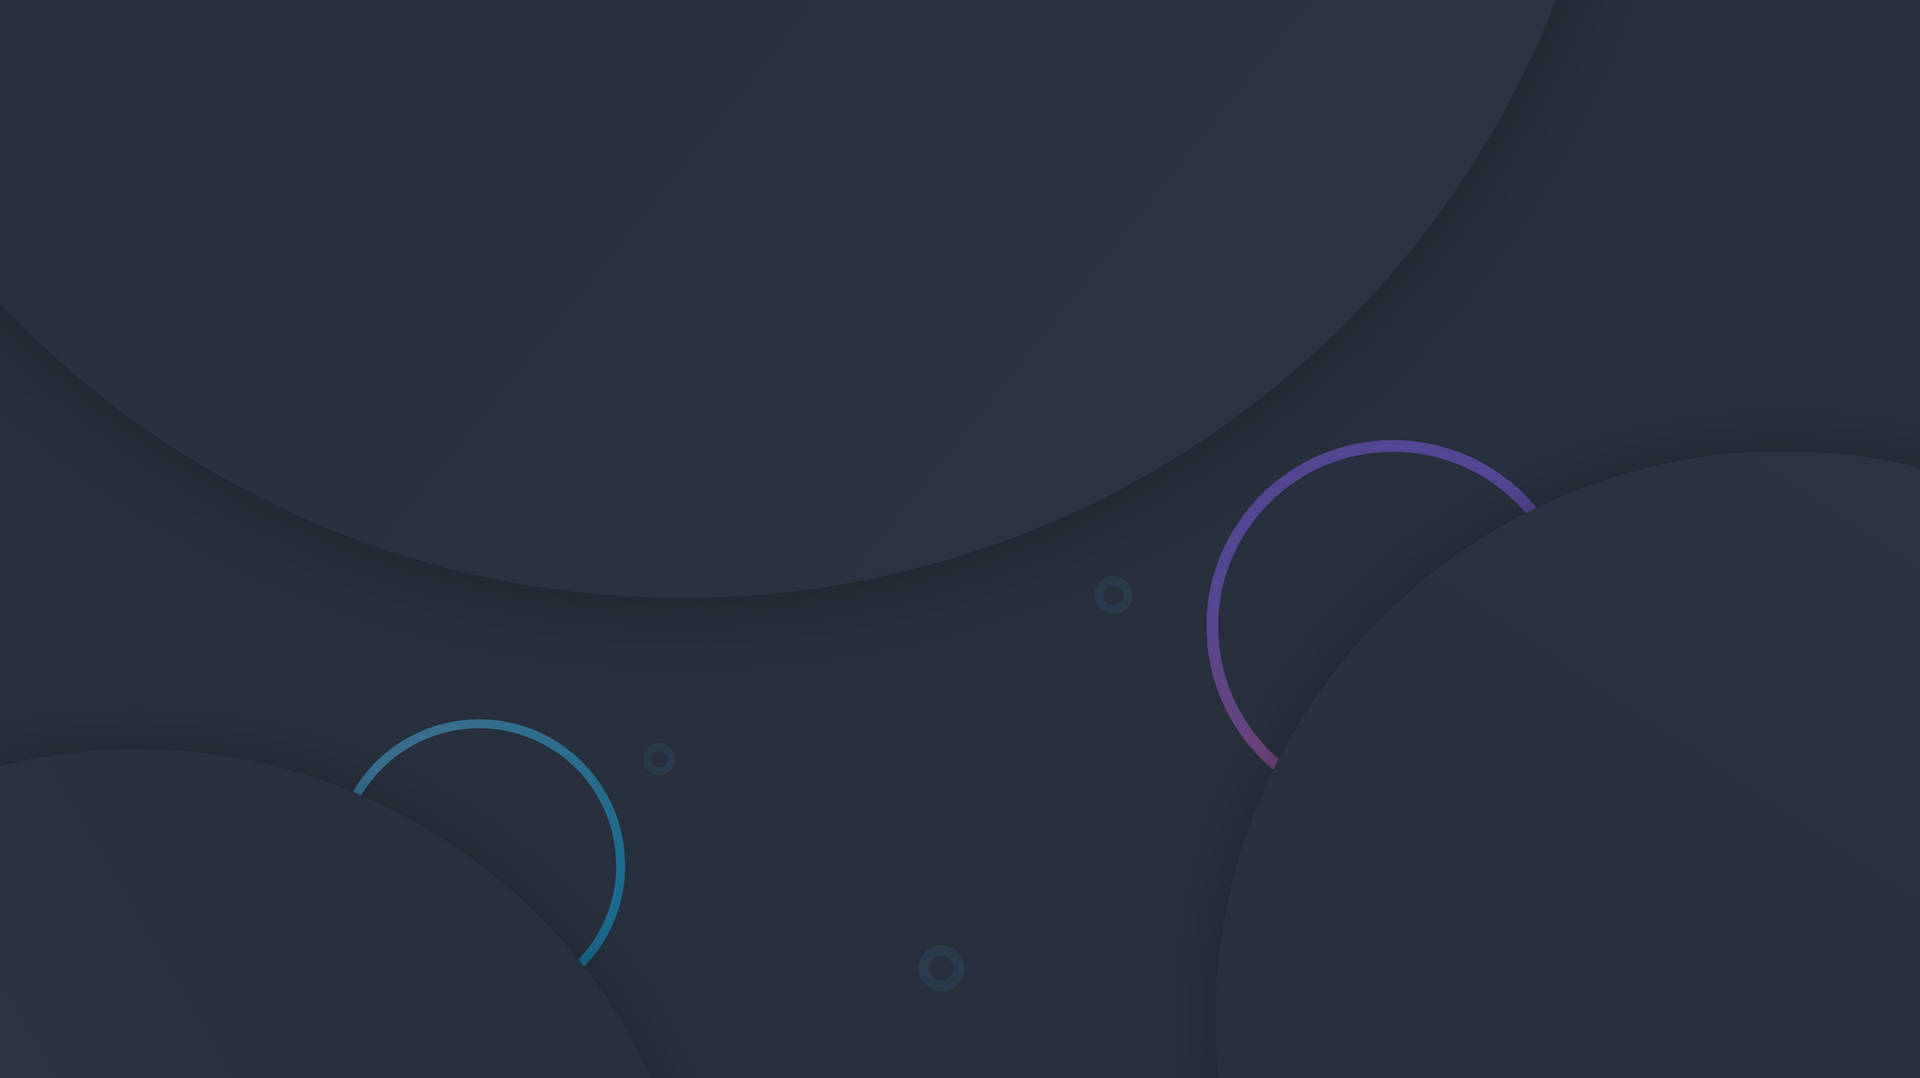 Dark Theme Glowing Abstract Circles Picture